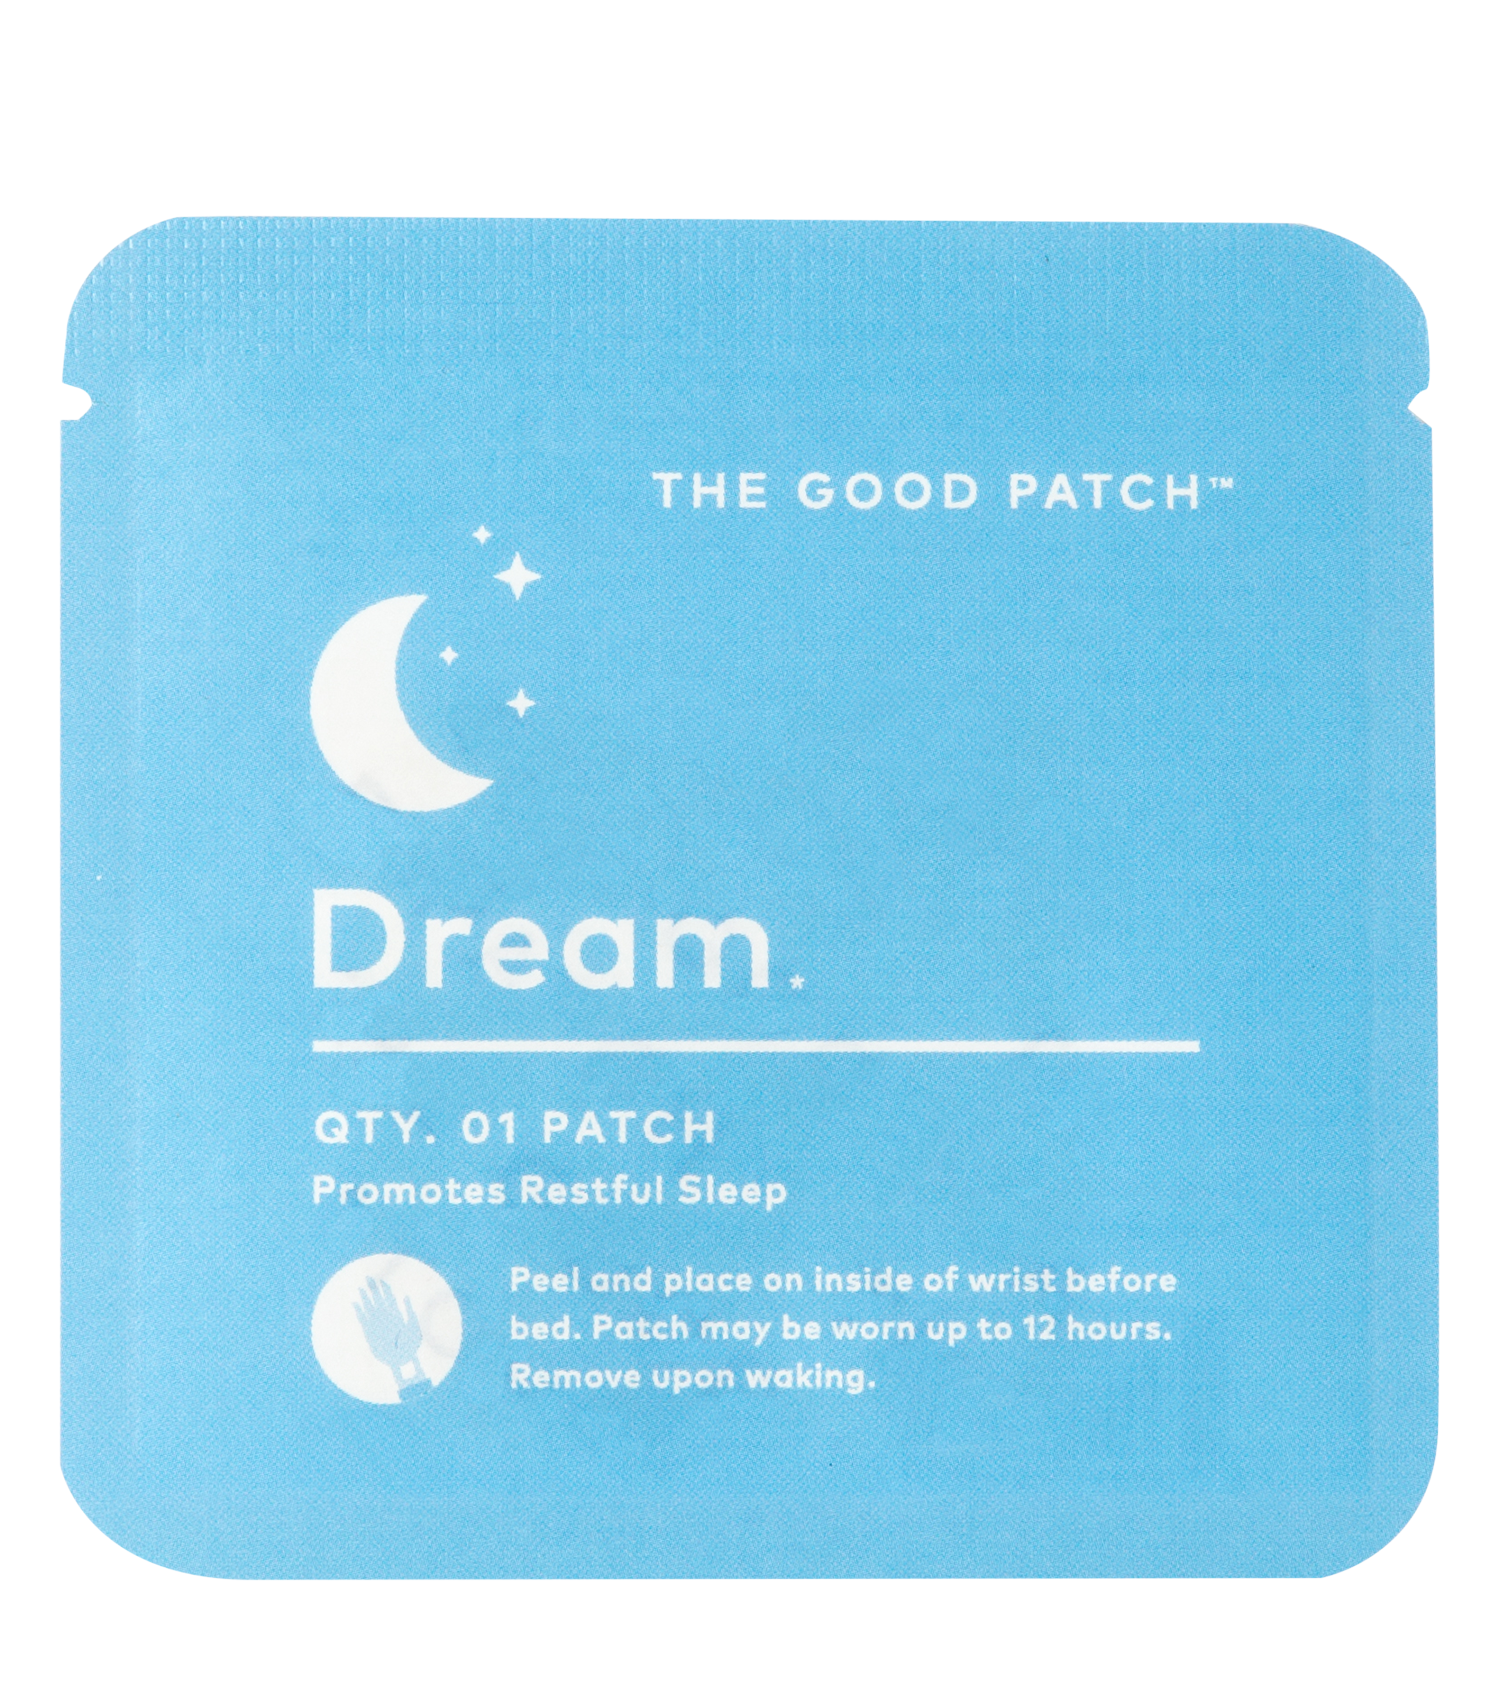 The Good Patch Dream Single